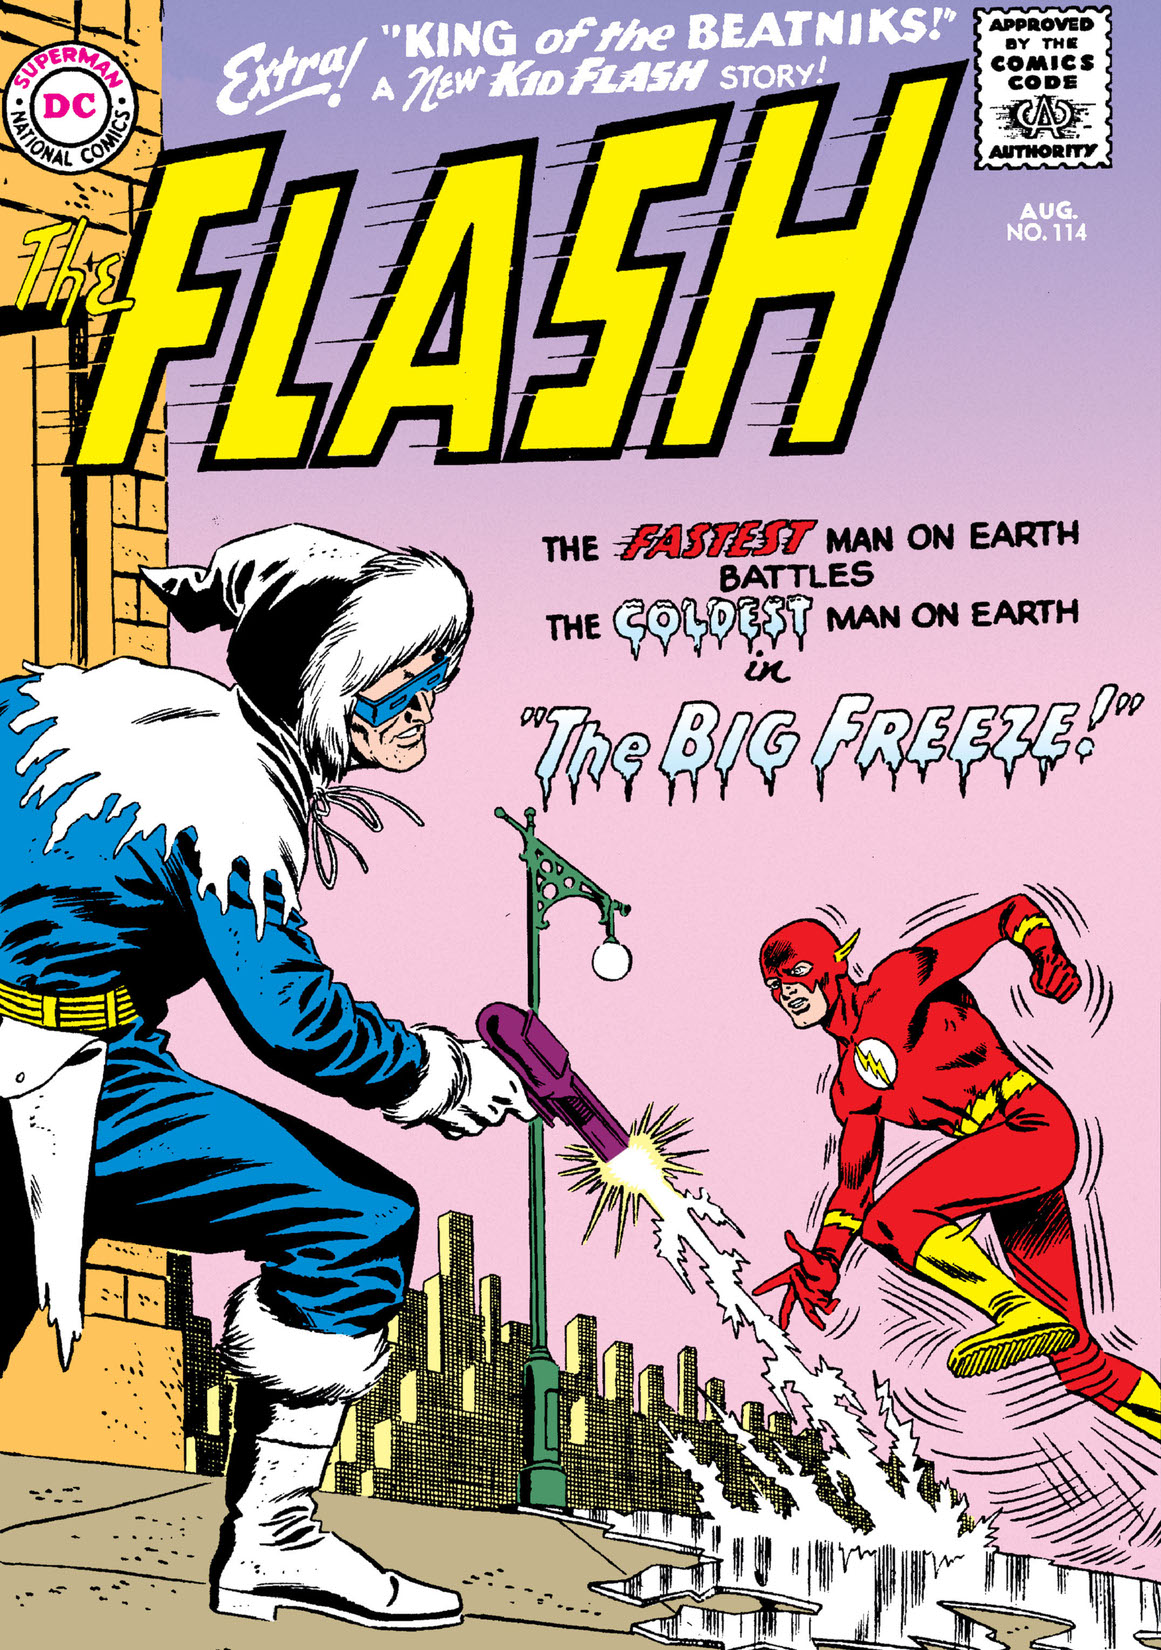 The Flash (1959-) #114 preview images